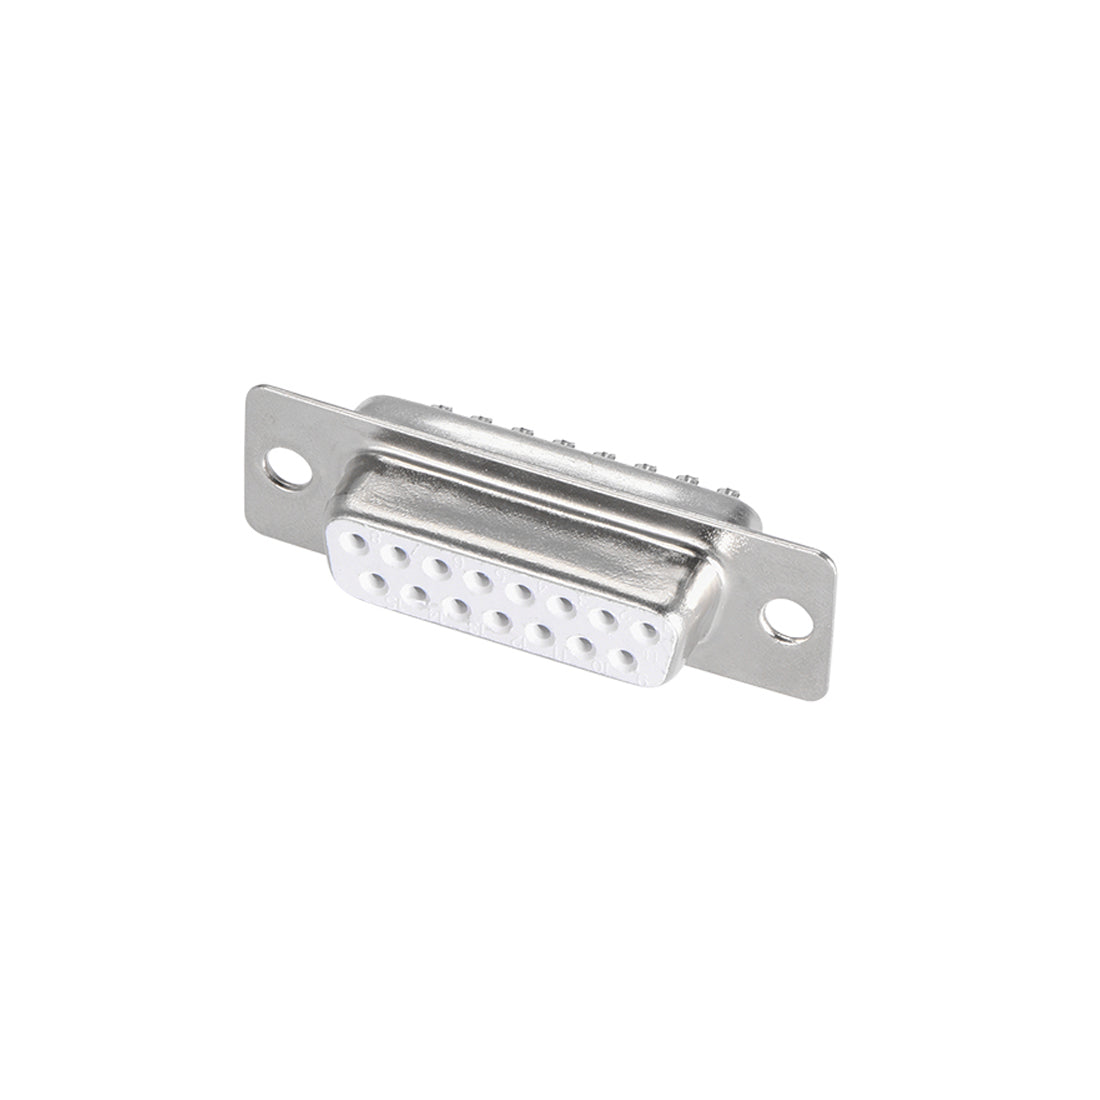 uxcell Uxcell D-sub Connector DB15 Female Socket 15-pin 2-row Port Terminal Breakout for Mechanical Equipment CNC Computers White 5pcs